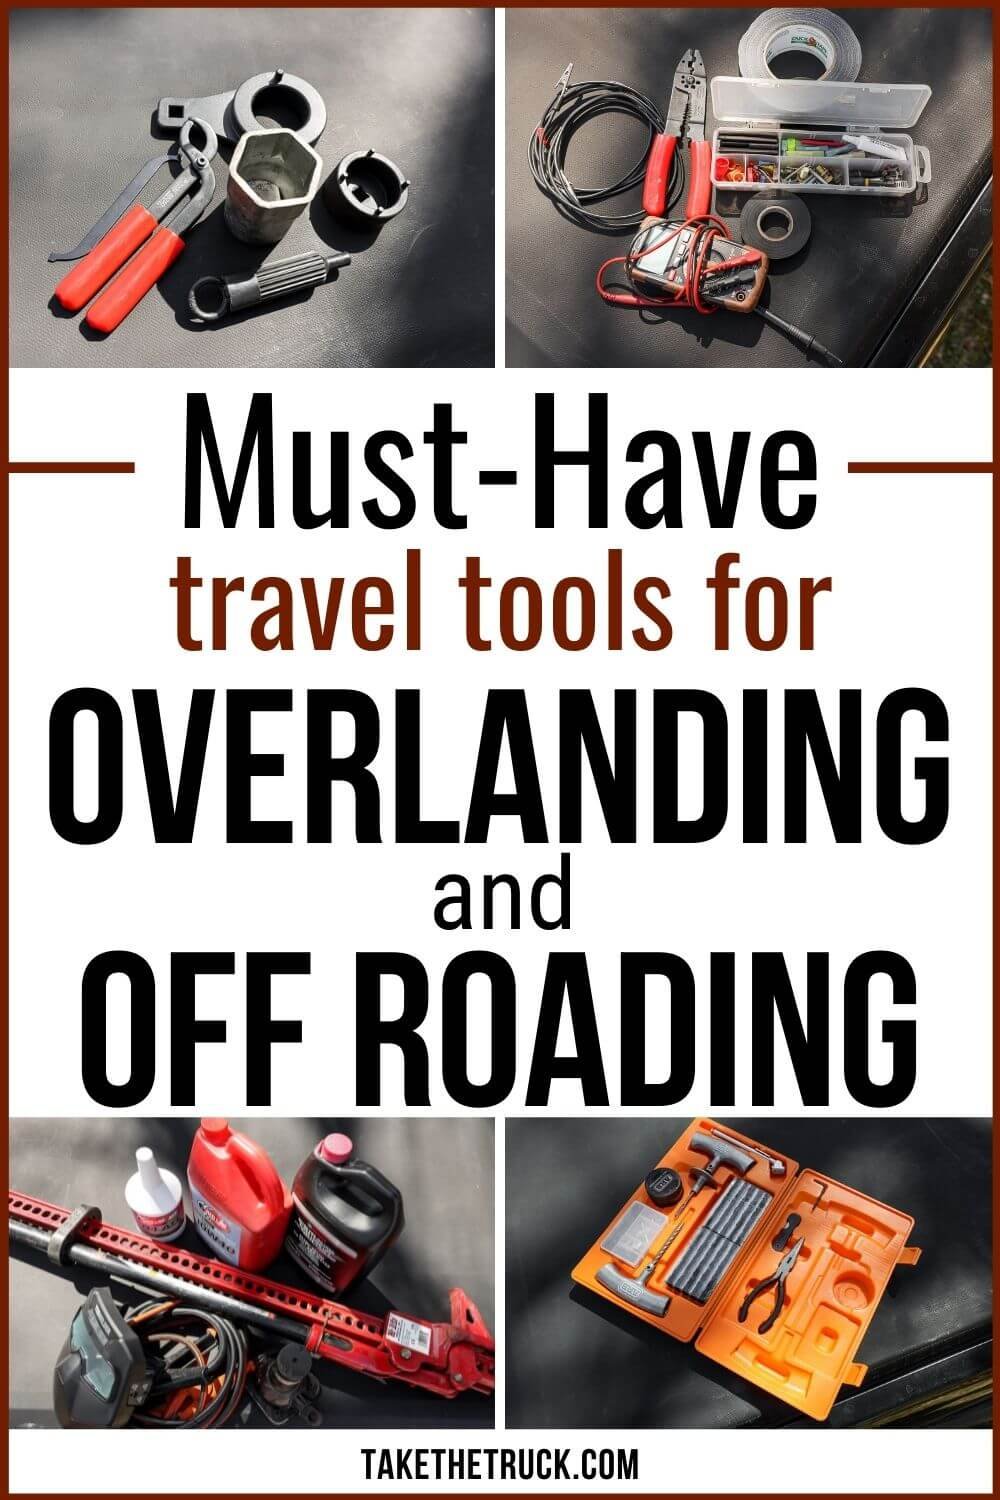 A guide on the overlanding tools and off roading tools you will want to put together into a travel tool kit. Overland tools and off road tools recommendations.